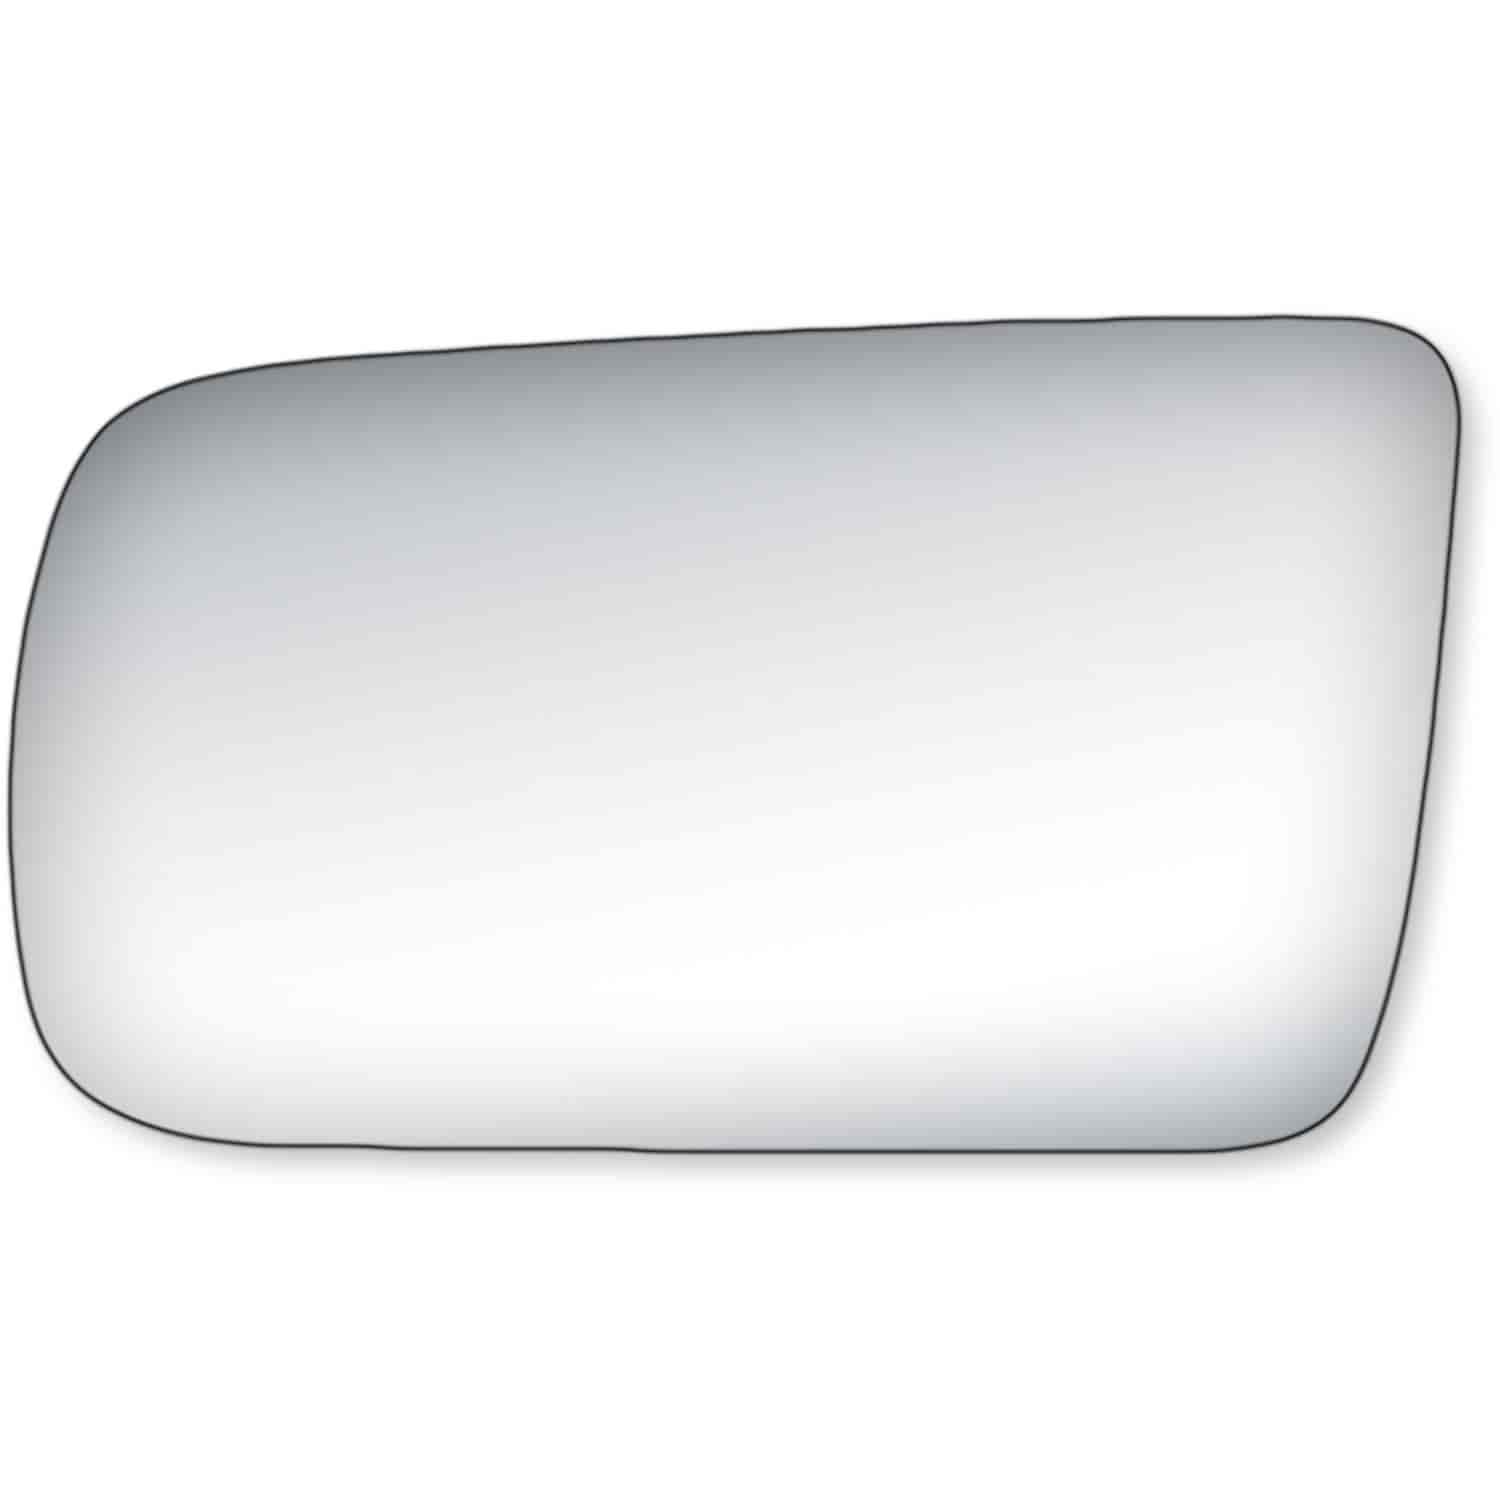 Replacement Glass for 87-91 Camry Sedan non-foldaway the glass measures 3 1/2 tall by 6 7/16 wide an